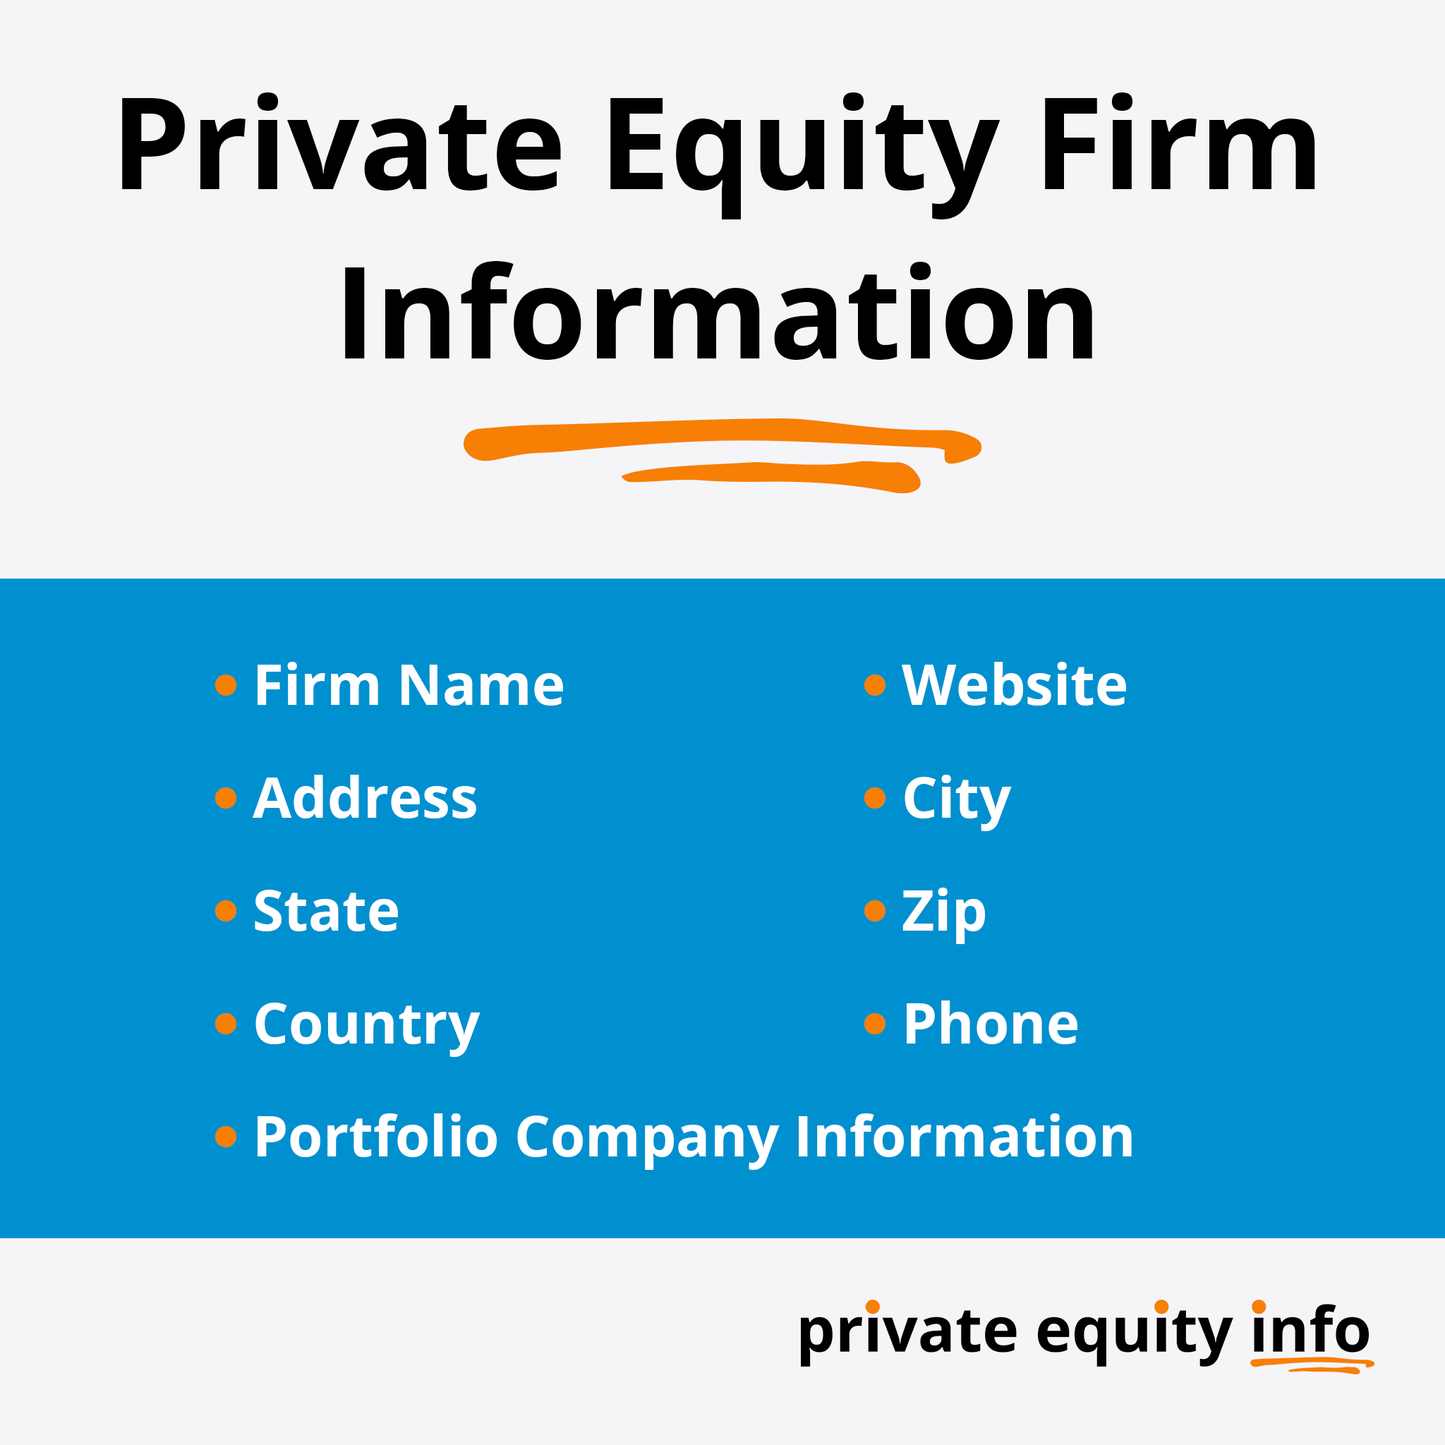 List of Private Equity Firms in SaaS Software